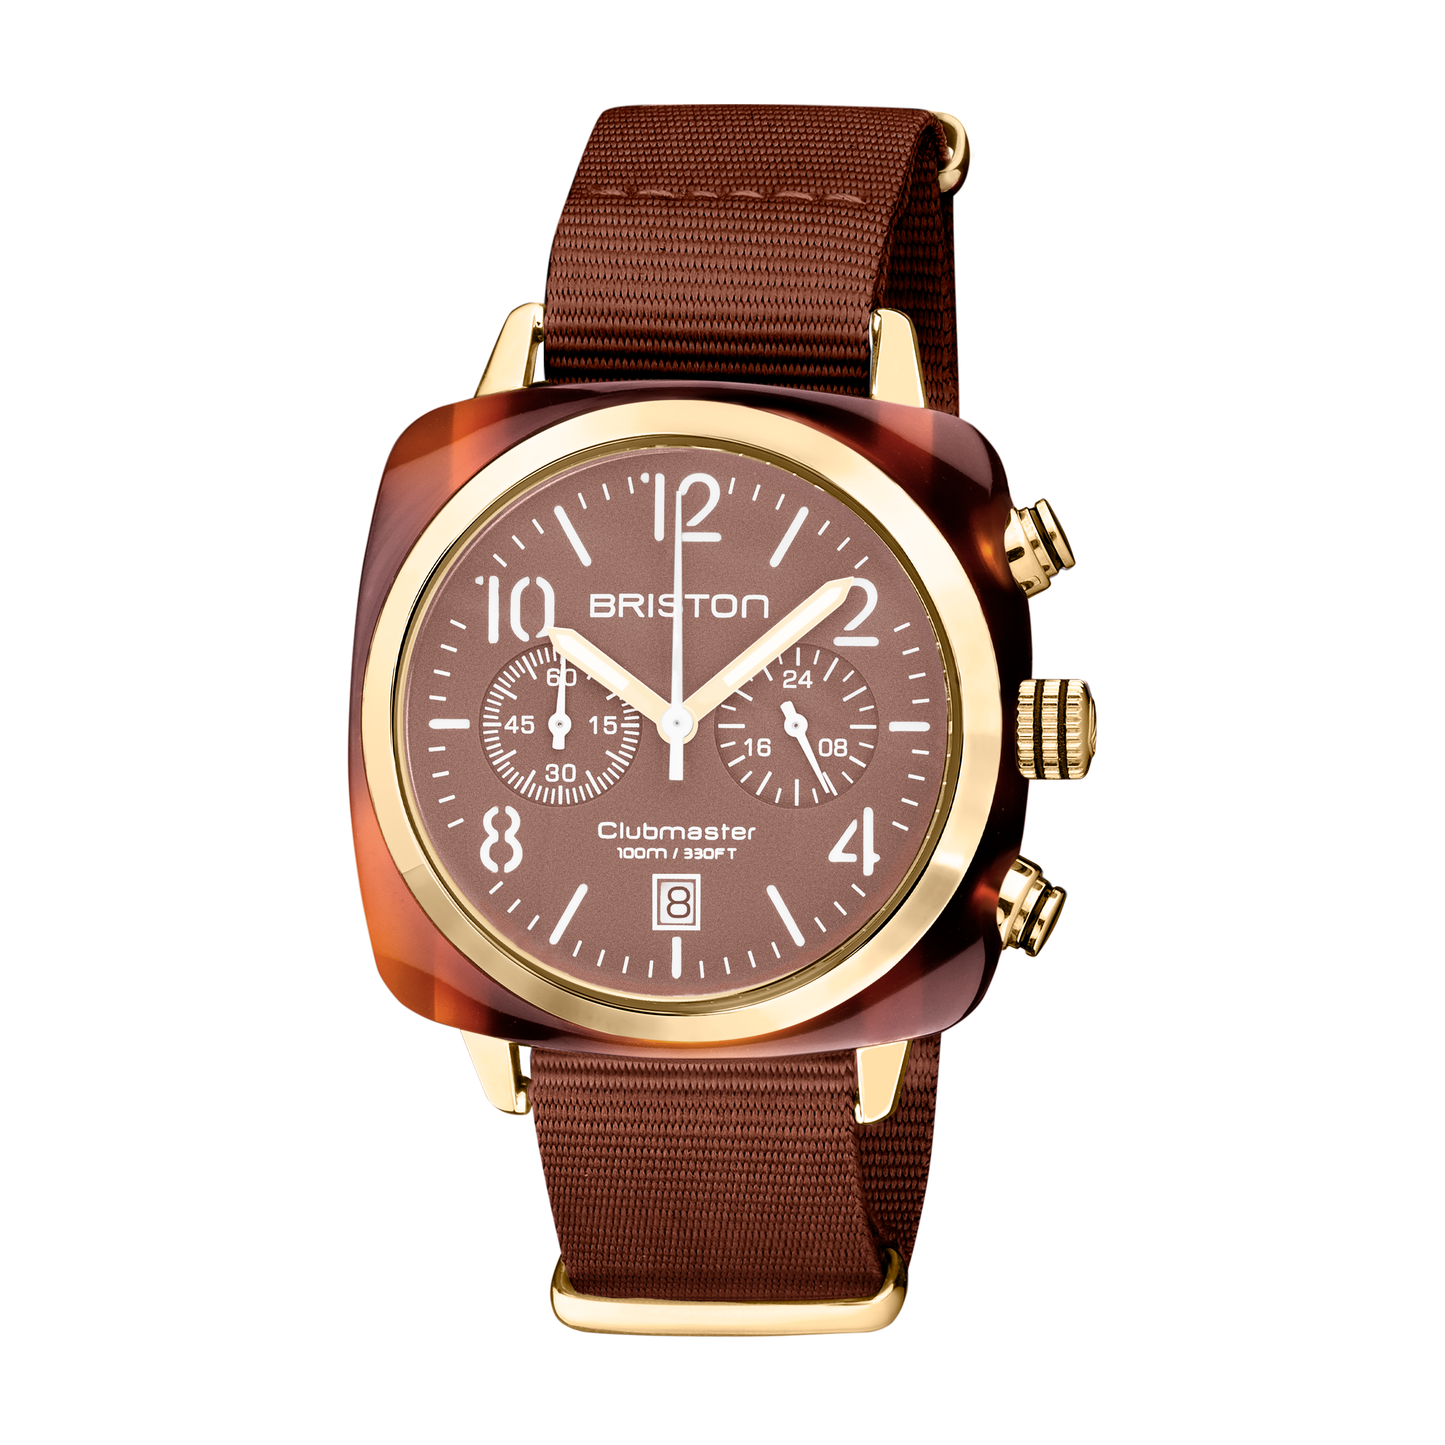 Briston Clubmaster Classic Chronograph, Terracotta Chocolate Dial and Nato Strap with Gold IP Accents